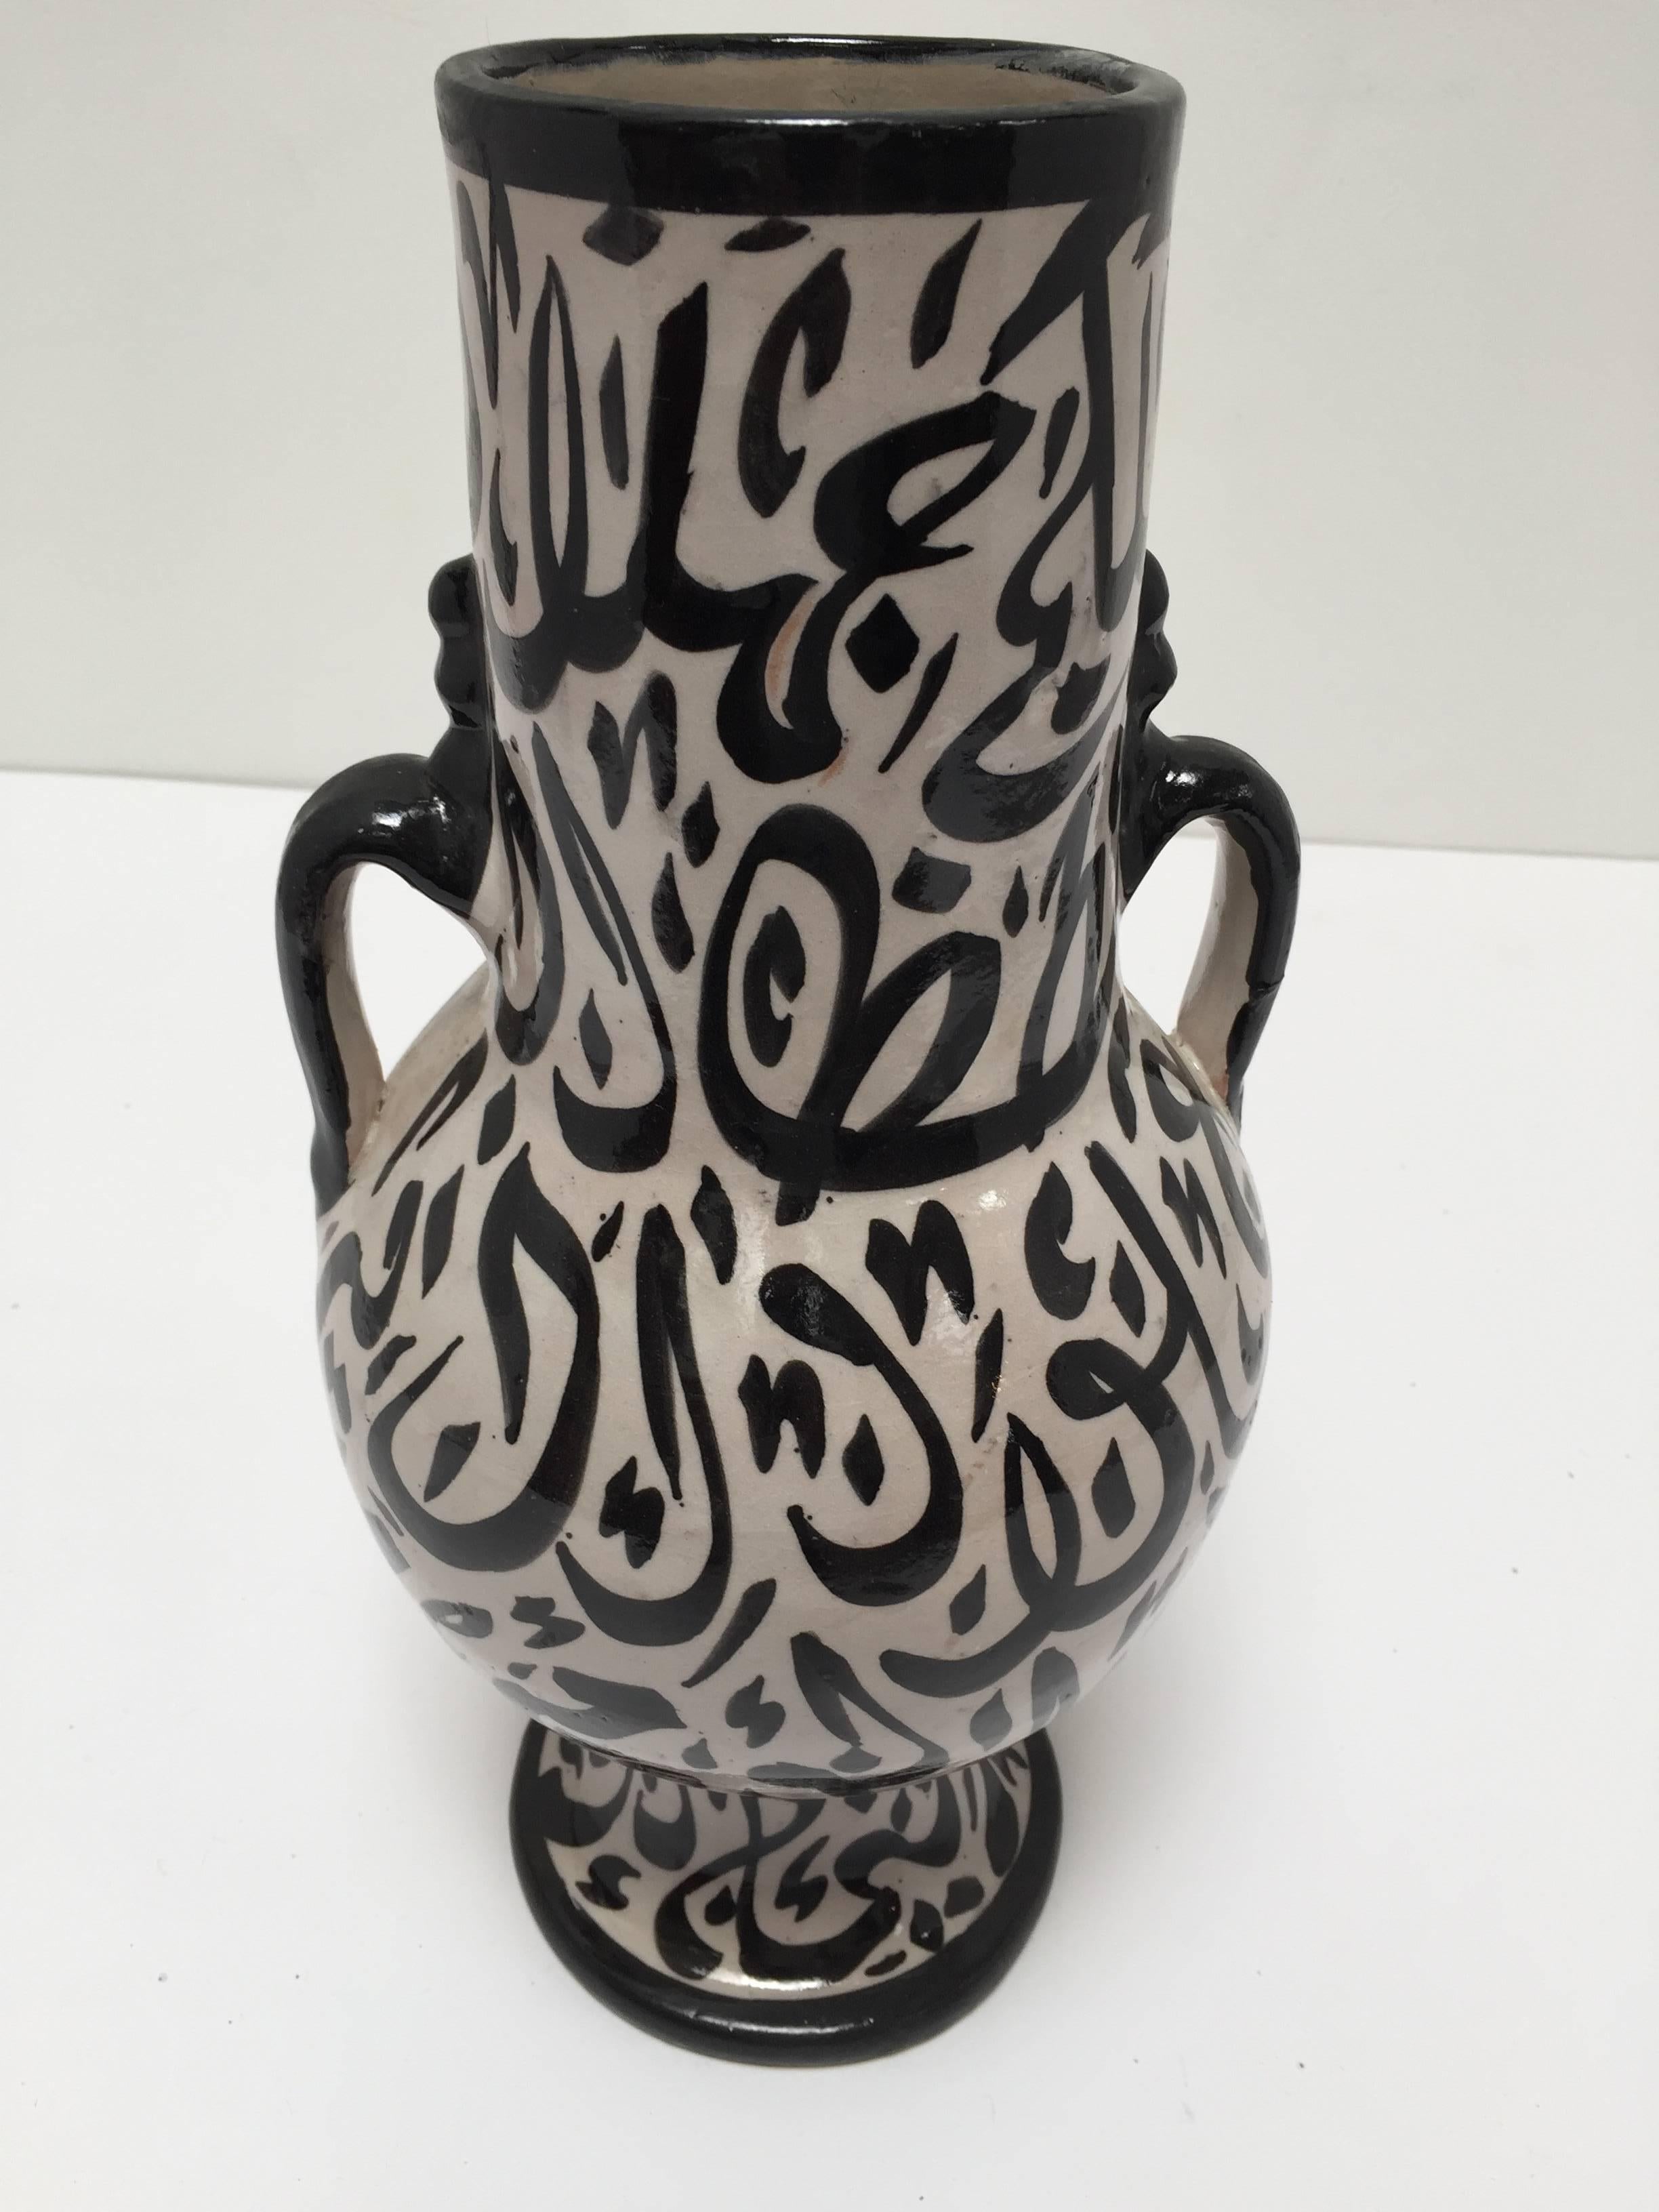 Hand-Crafted Moroccan Glazed Ceramic Vase with Arabic Calligraphy from Fez